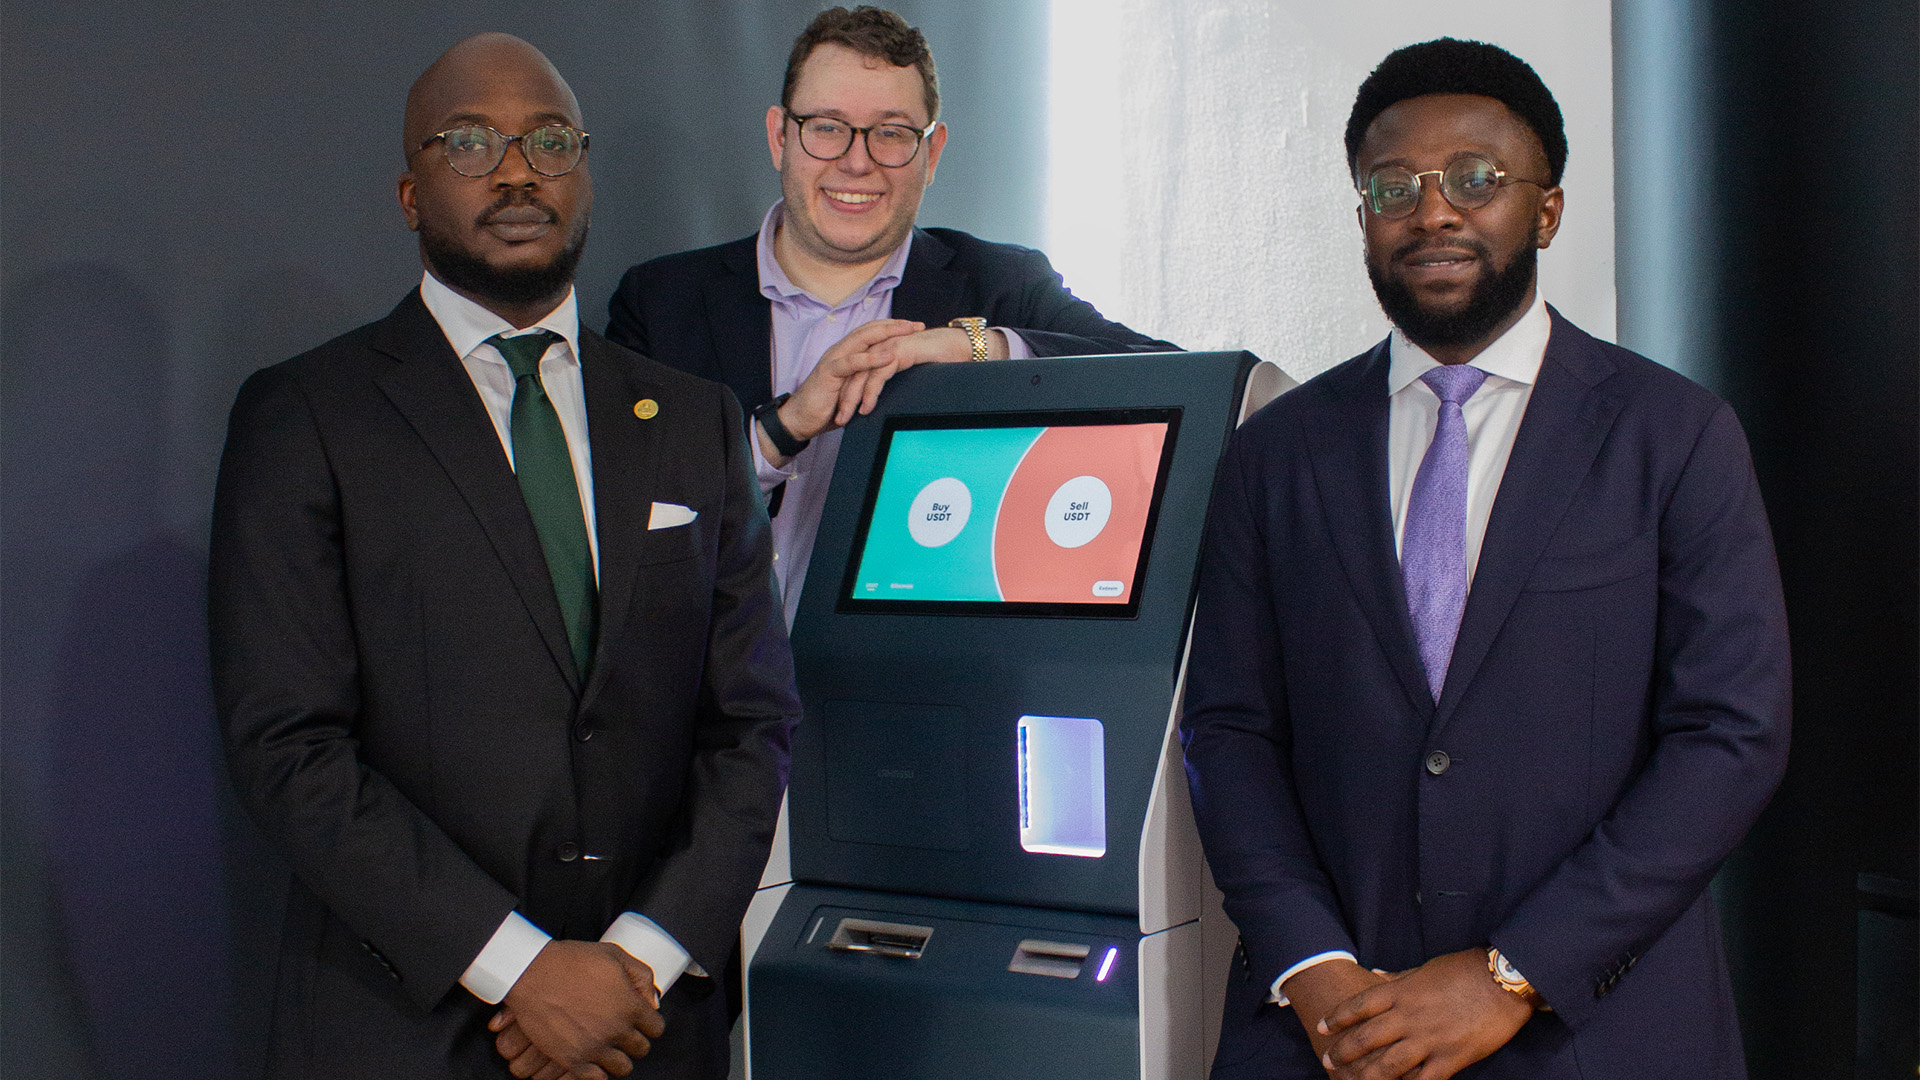 Pascal Ntsama and Oyedeji Oluwoye Have Raised $2.3M In A Seed Round For Their Web3 Neo Fintech Bank Designed To Improve Africa's Infrastructure